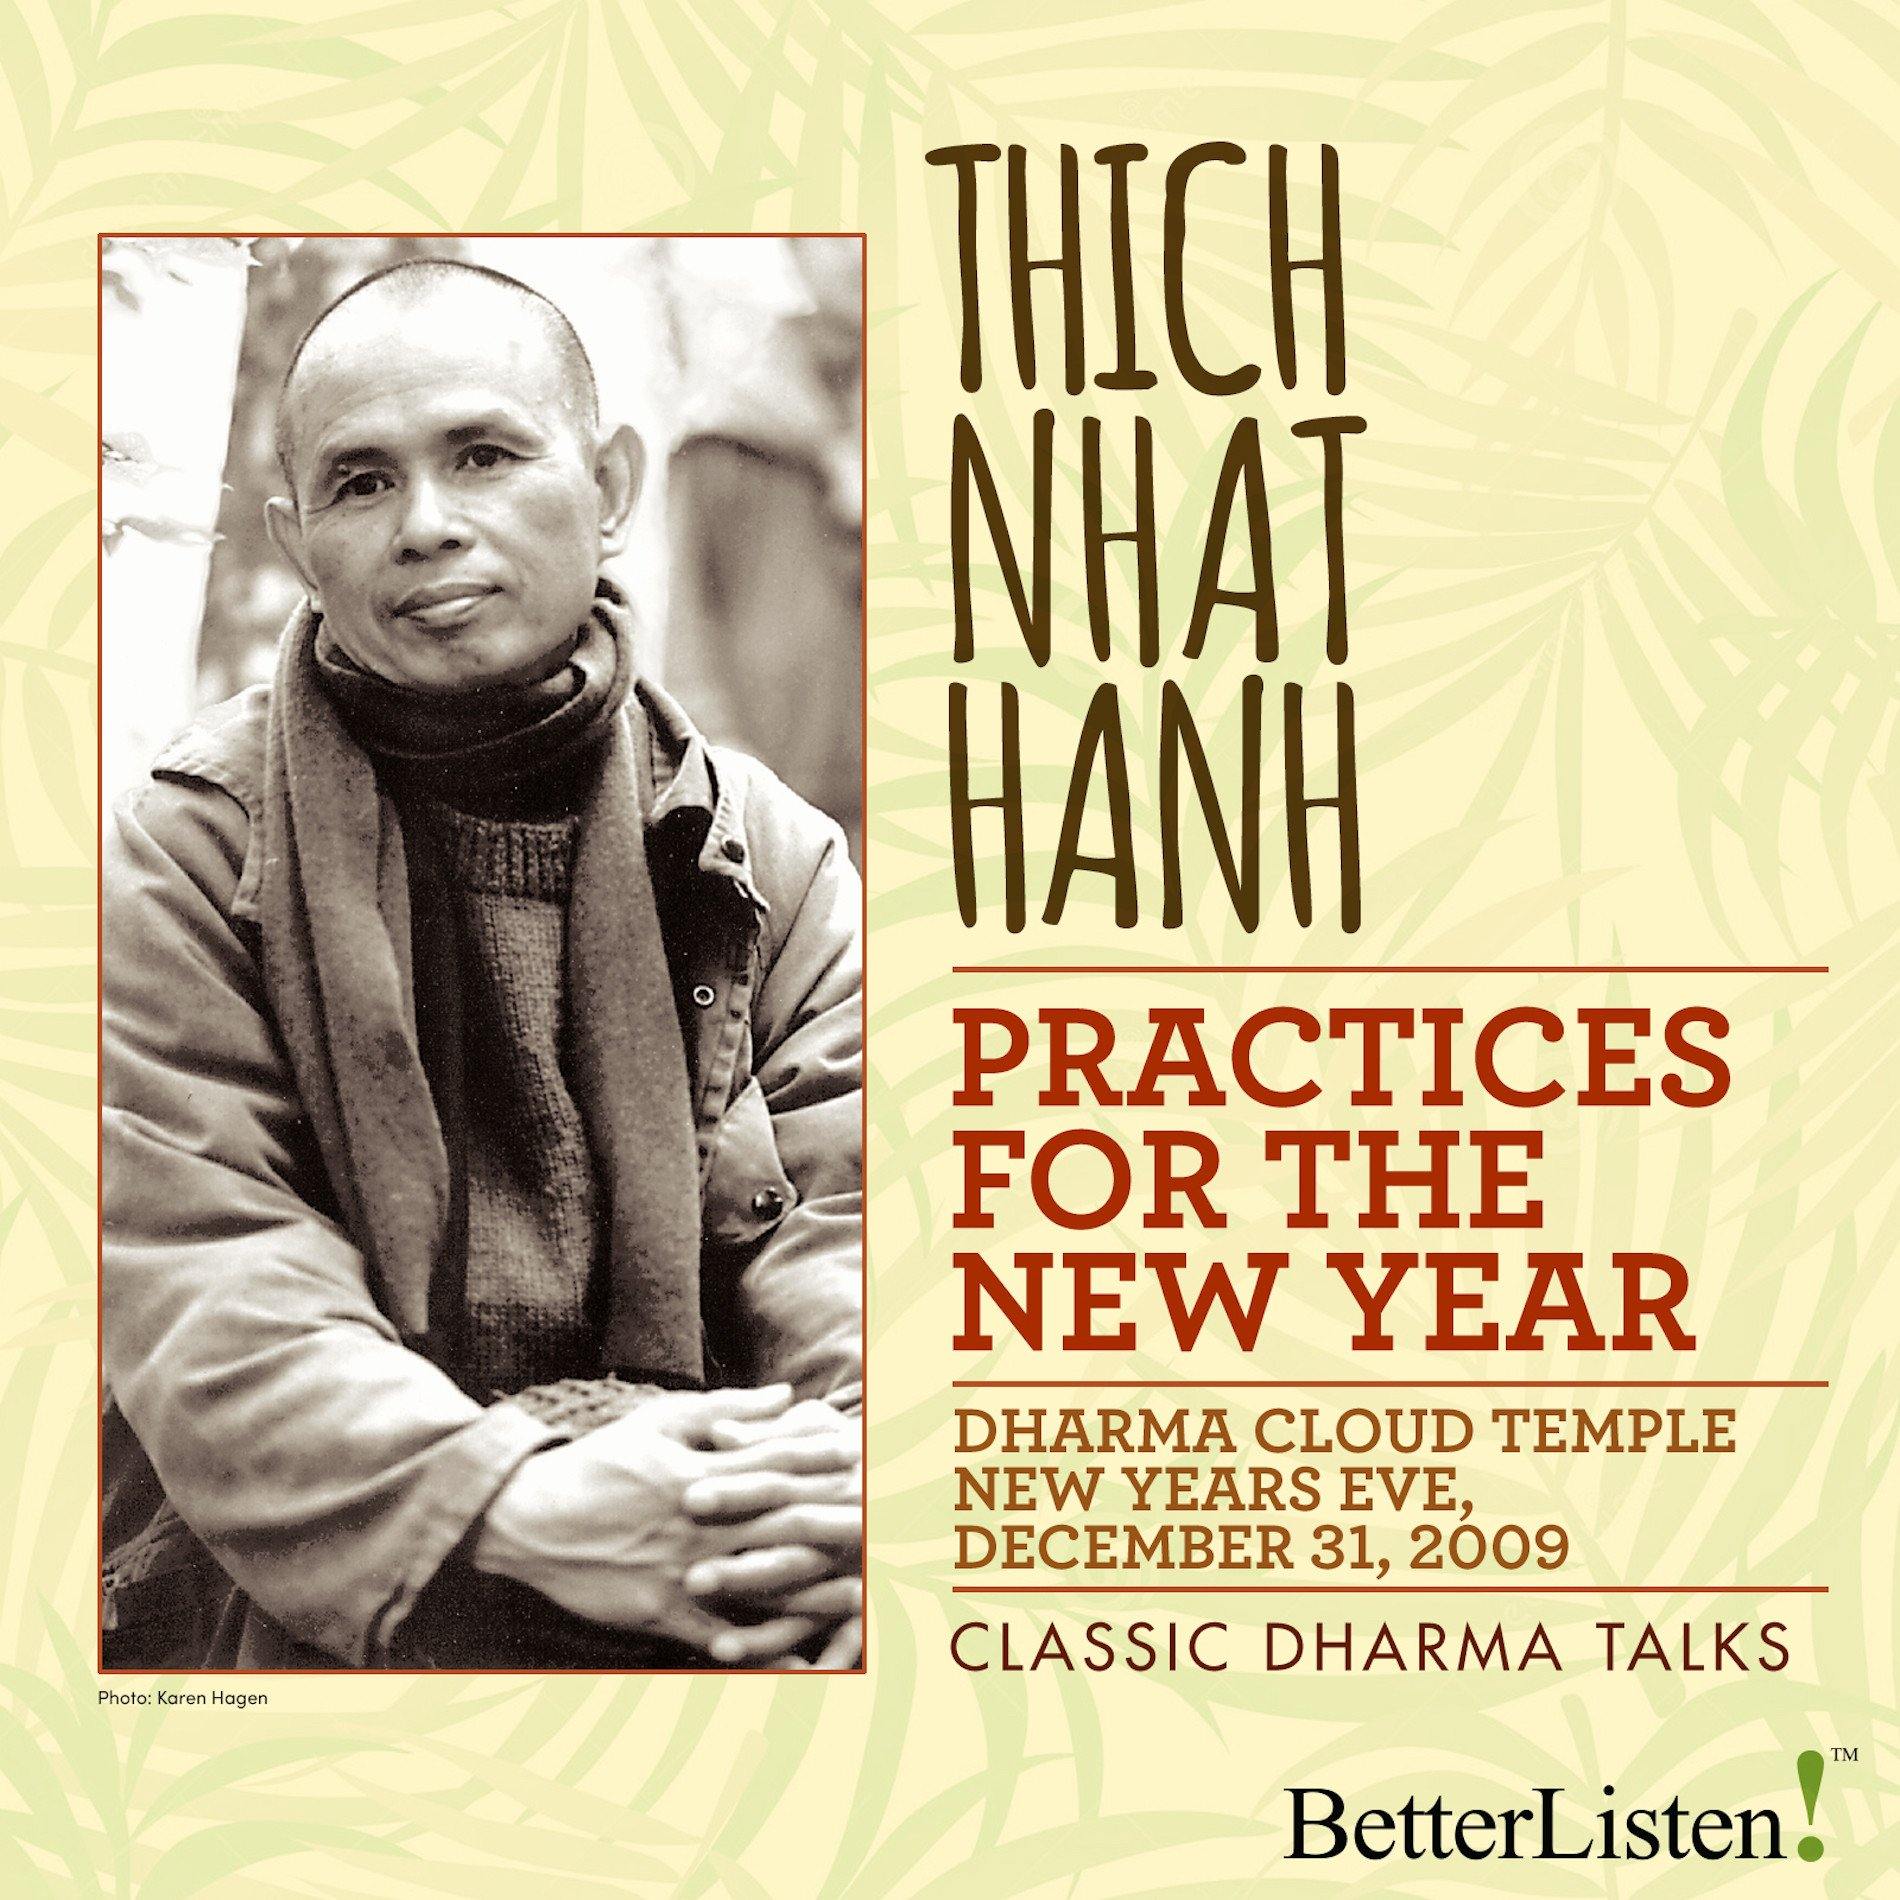 Practices for the New Year by Thich Nhat Hanh Audio Program Parallax Press - BetterListen!